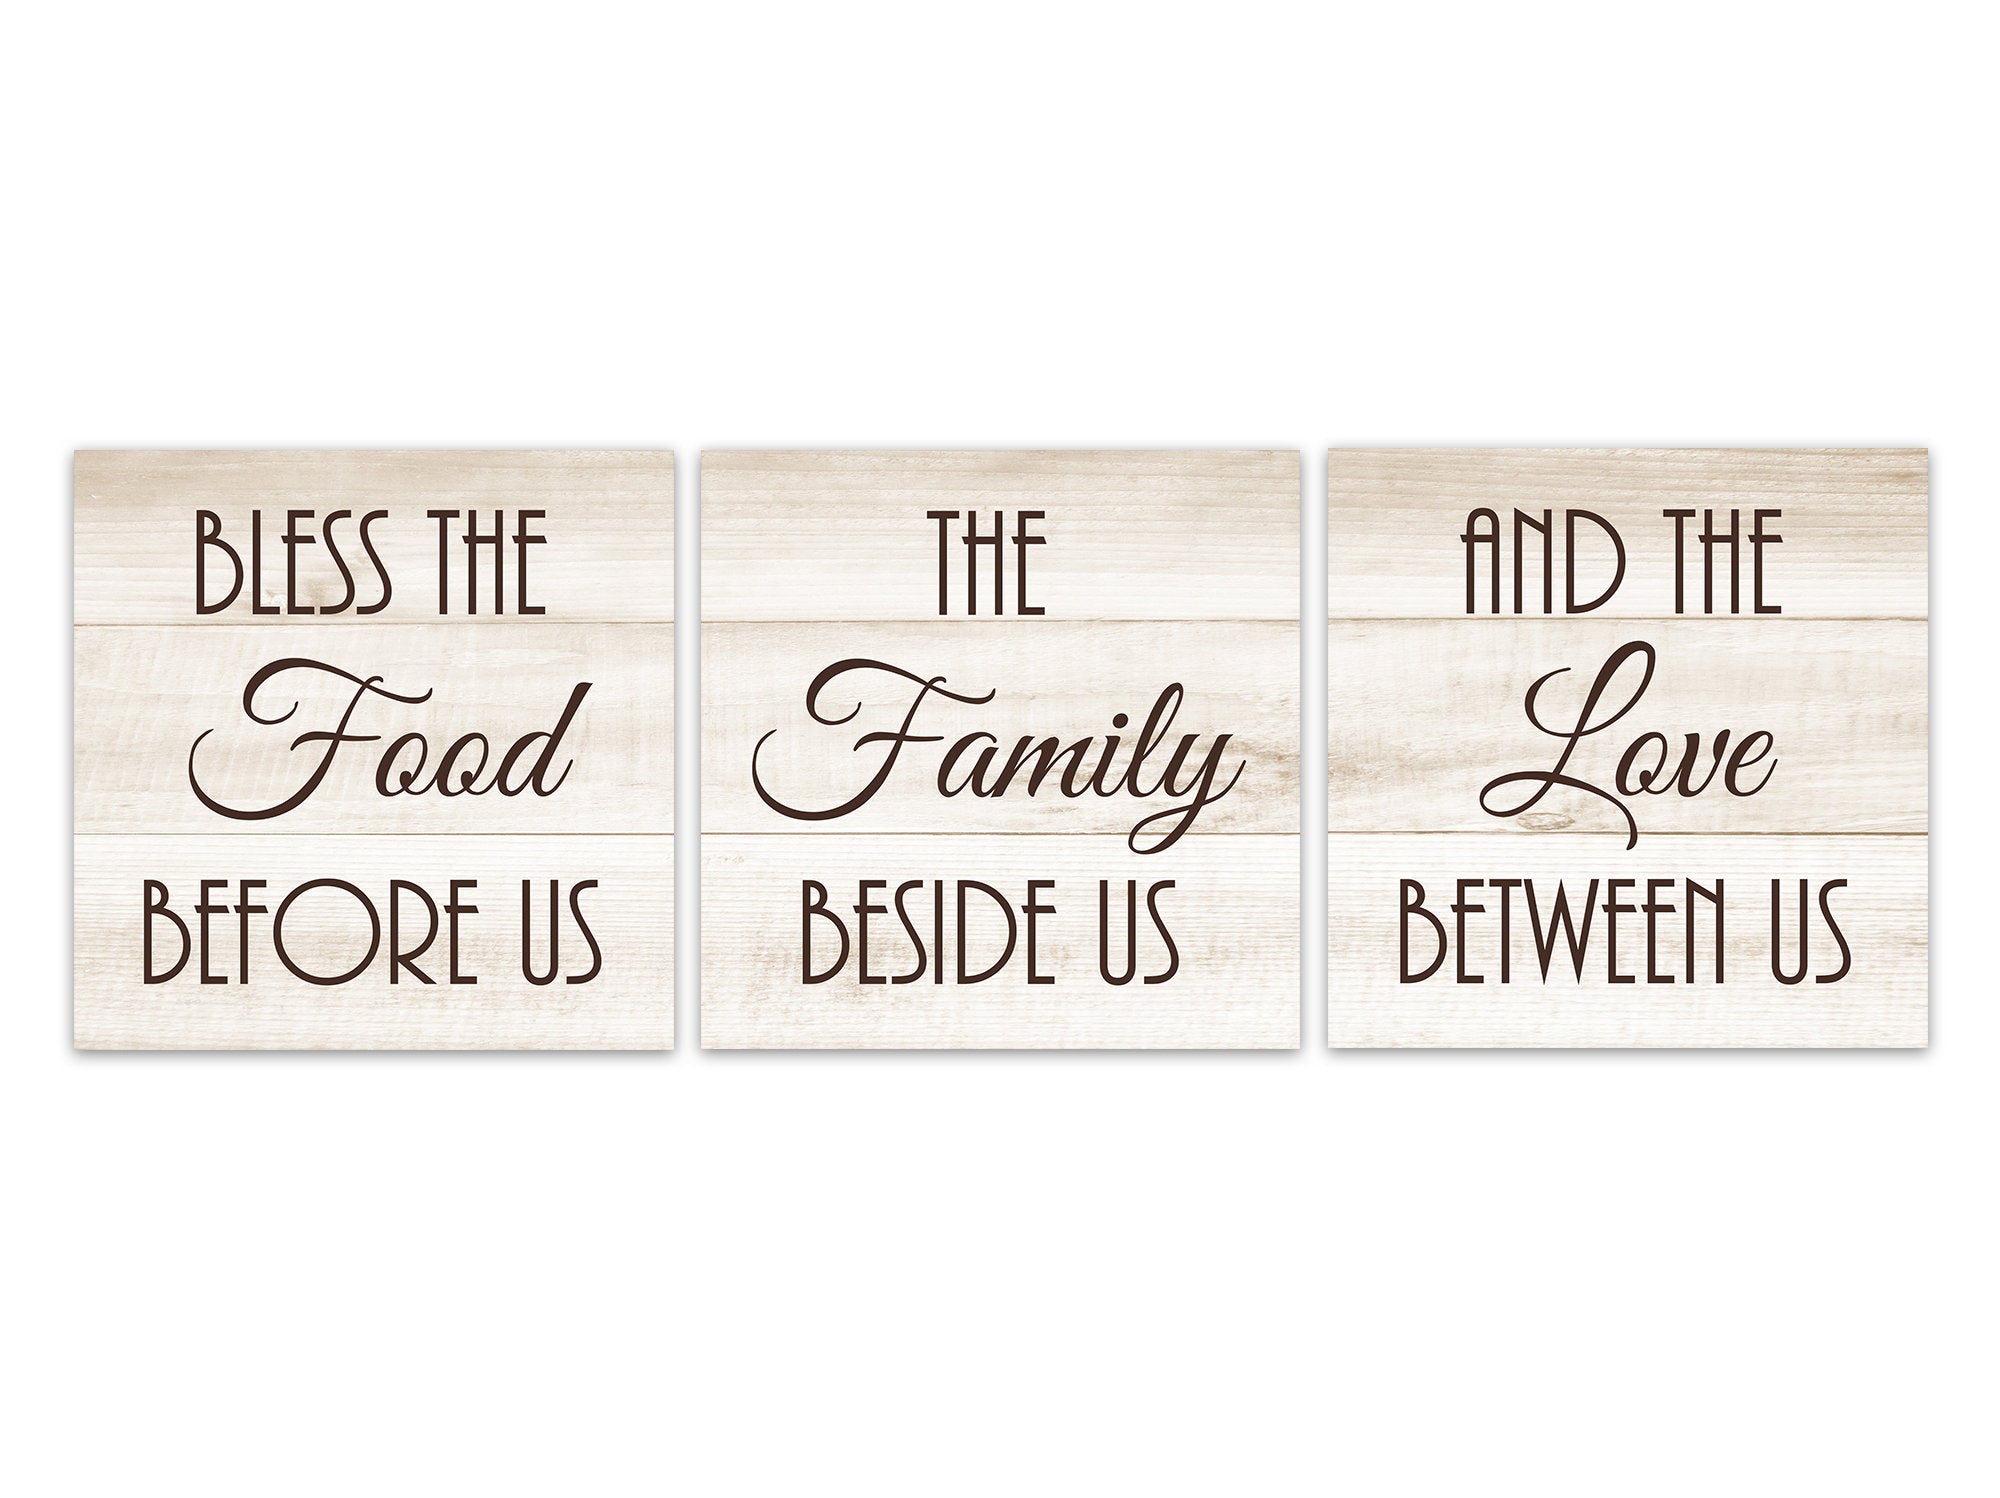 Brown & Tan Farmhouse Dining Room 3pc Square Wall Art "Bless The Food Before Us" -HOME557